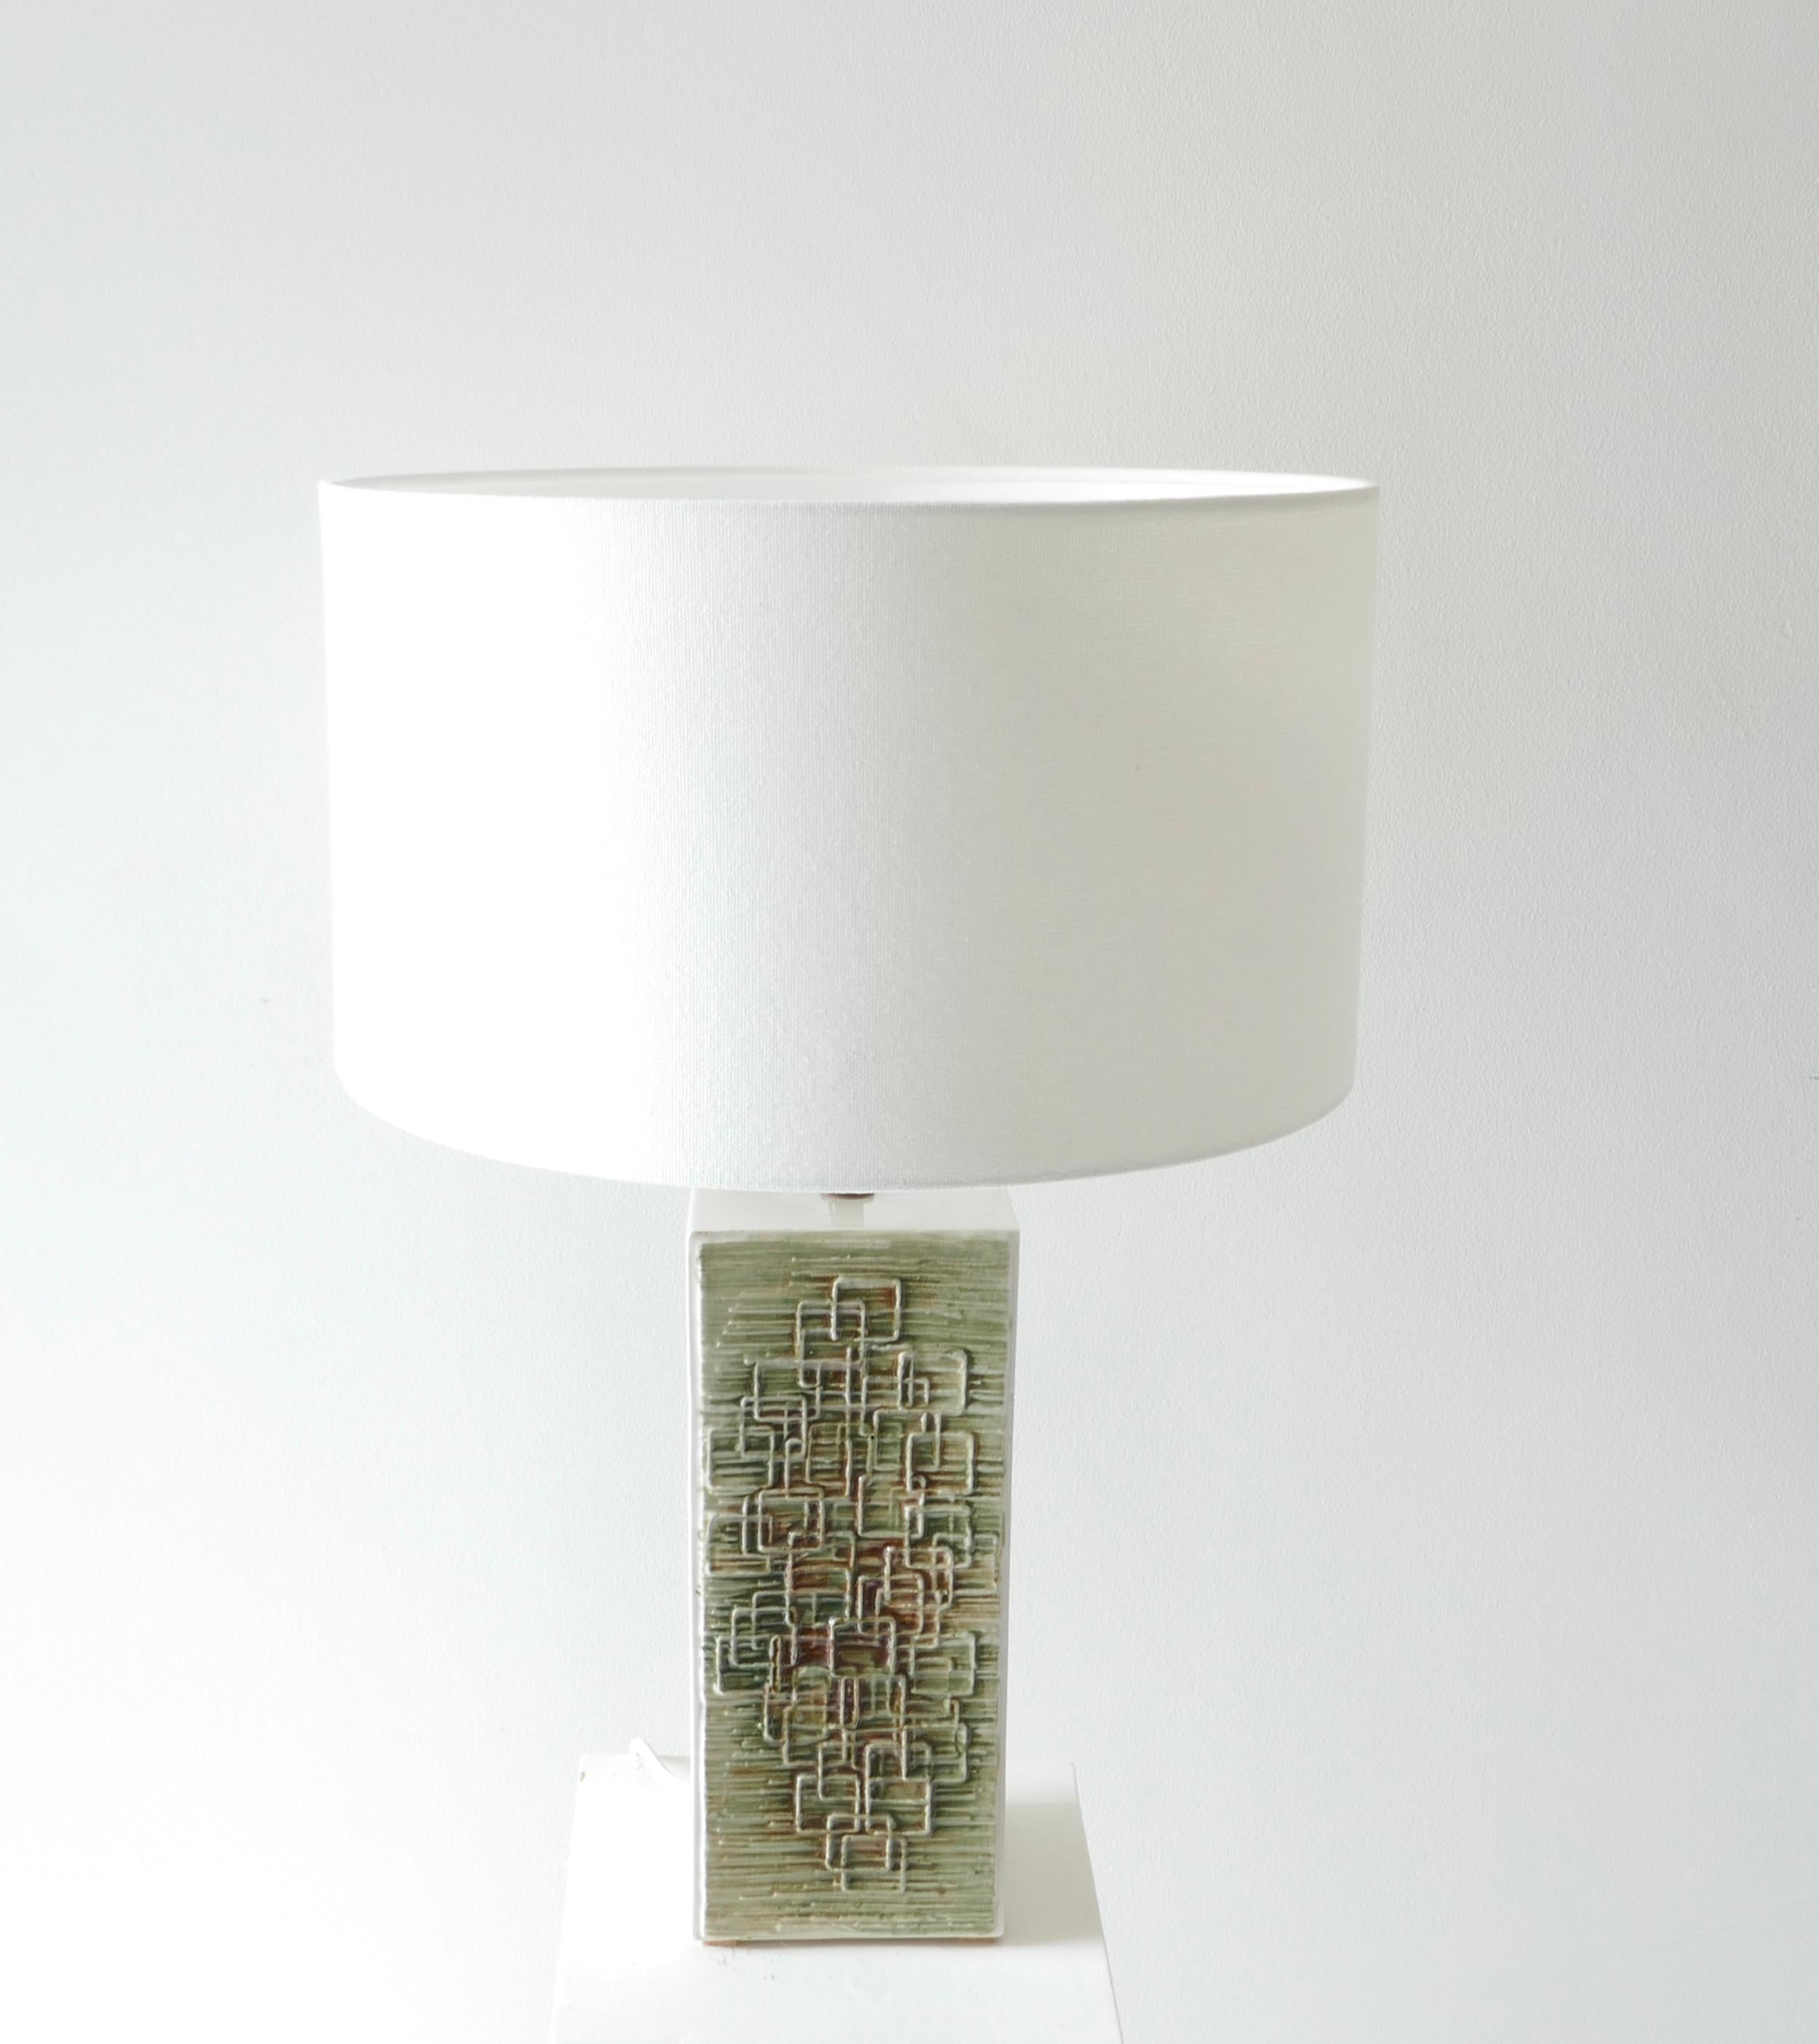 Green Tone Ceramic Table Lamp, 1960s For Sale 4